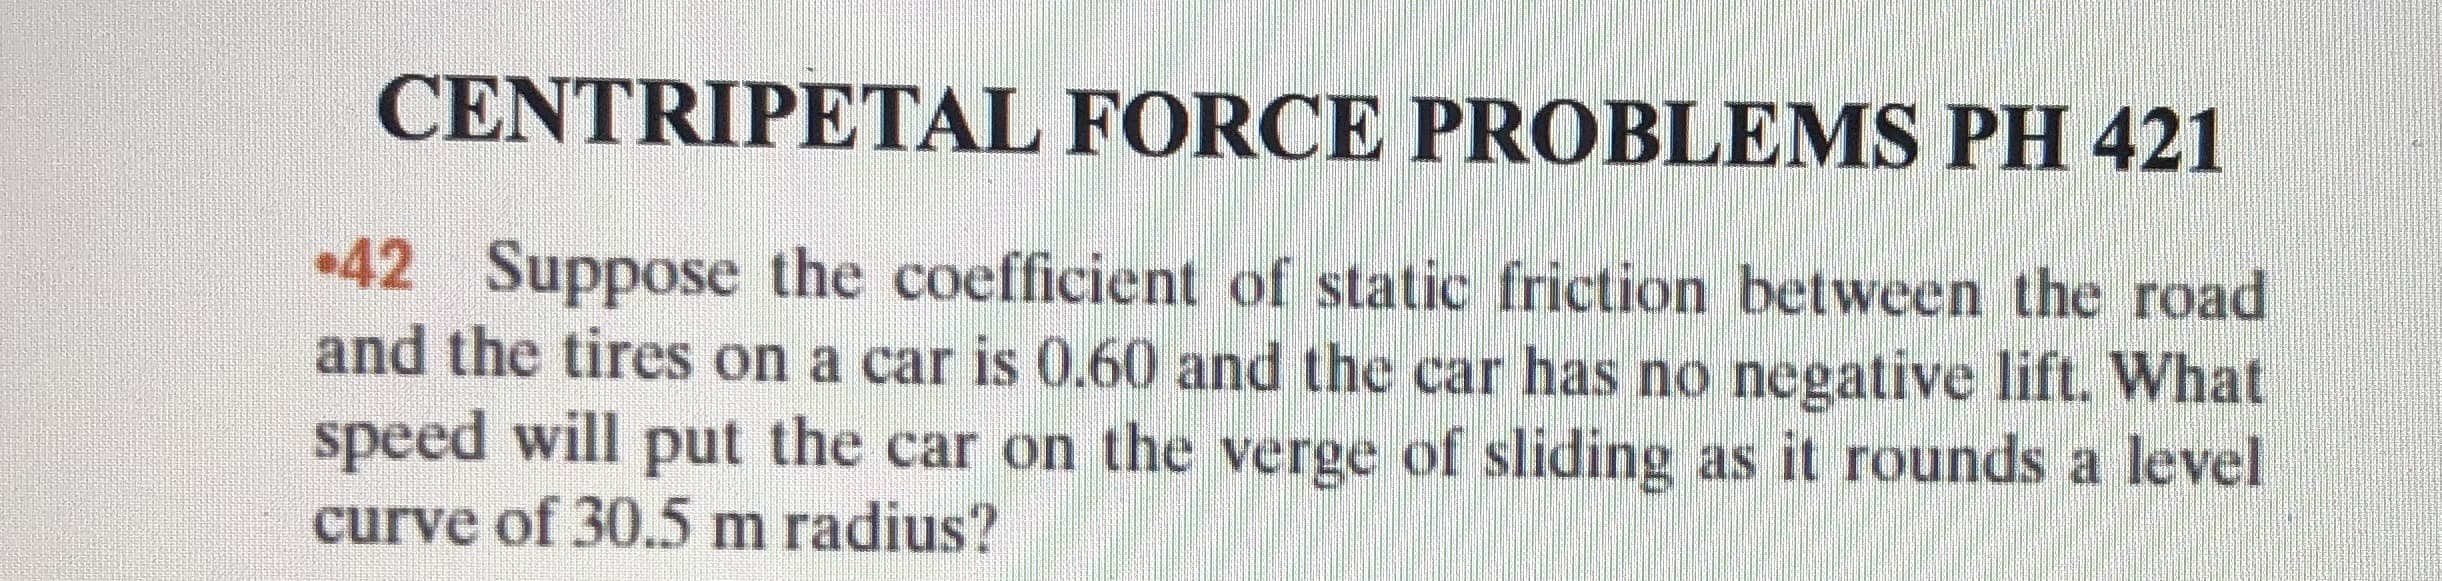 CENTRIPETAL FORCE PROBLEMS PH 421
42 Suppose the coefficient of static friction between the road
and the tires on a car is 0.60 and the car has no negative lift. What
speed will put the car on the verge of sliding as it rounds a level
curve of 30.5 m radius?
